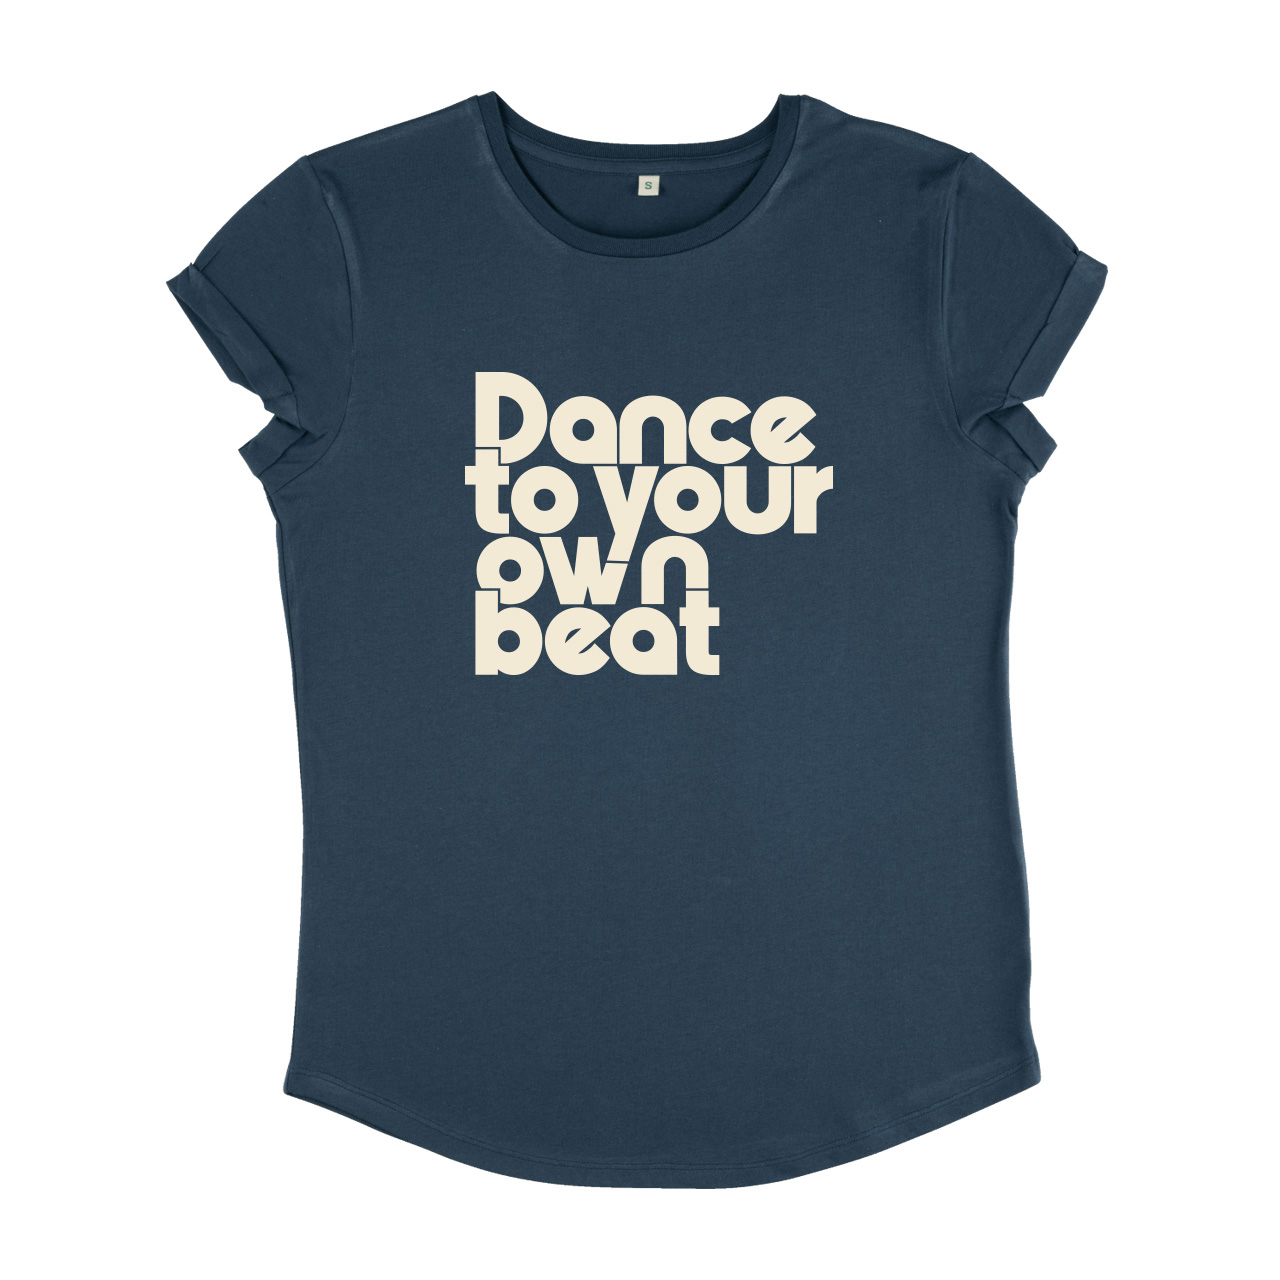 Dance To Your Own Beat Tee - Regular Fit